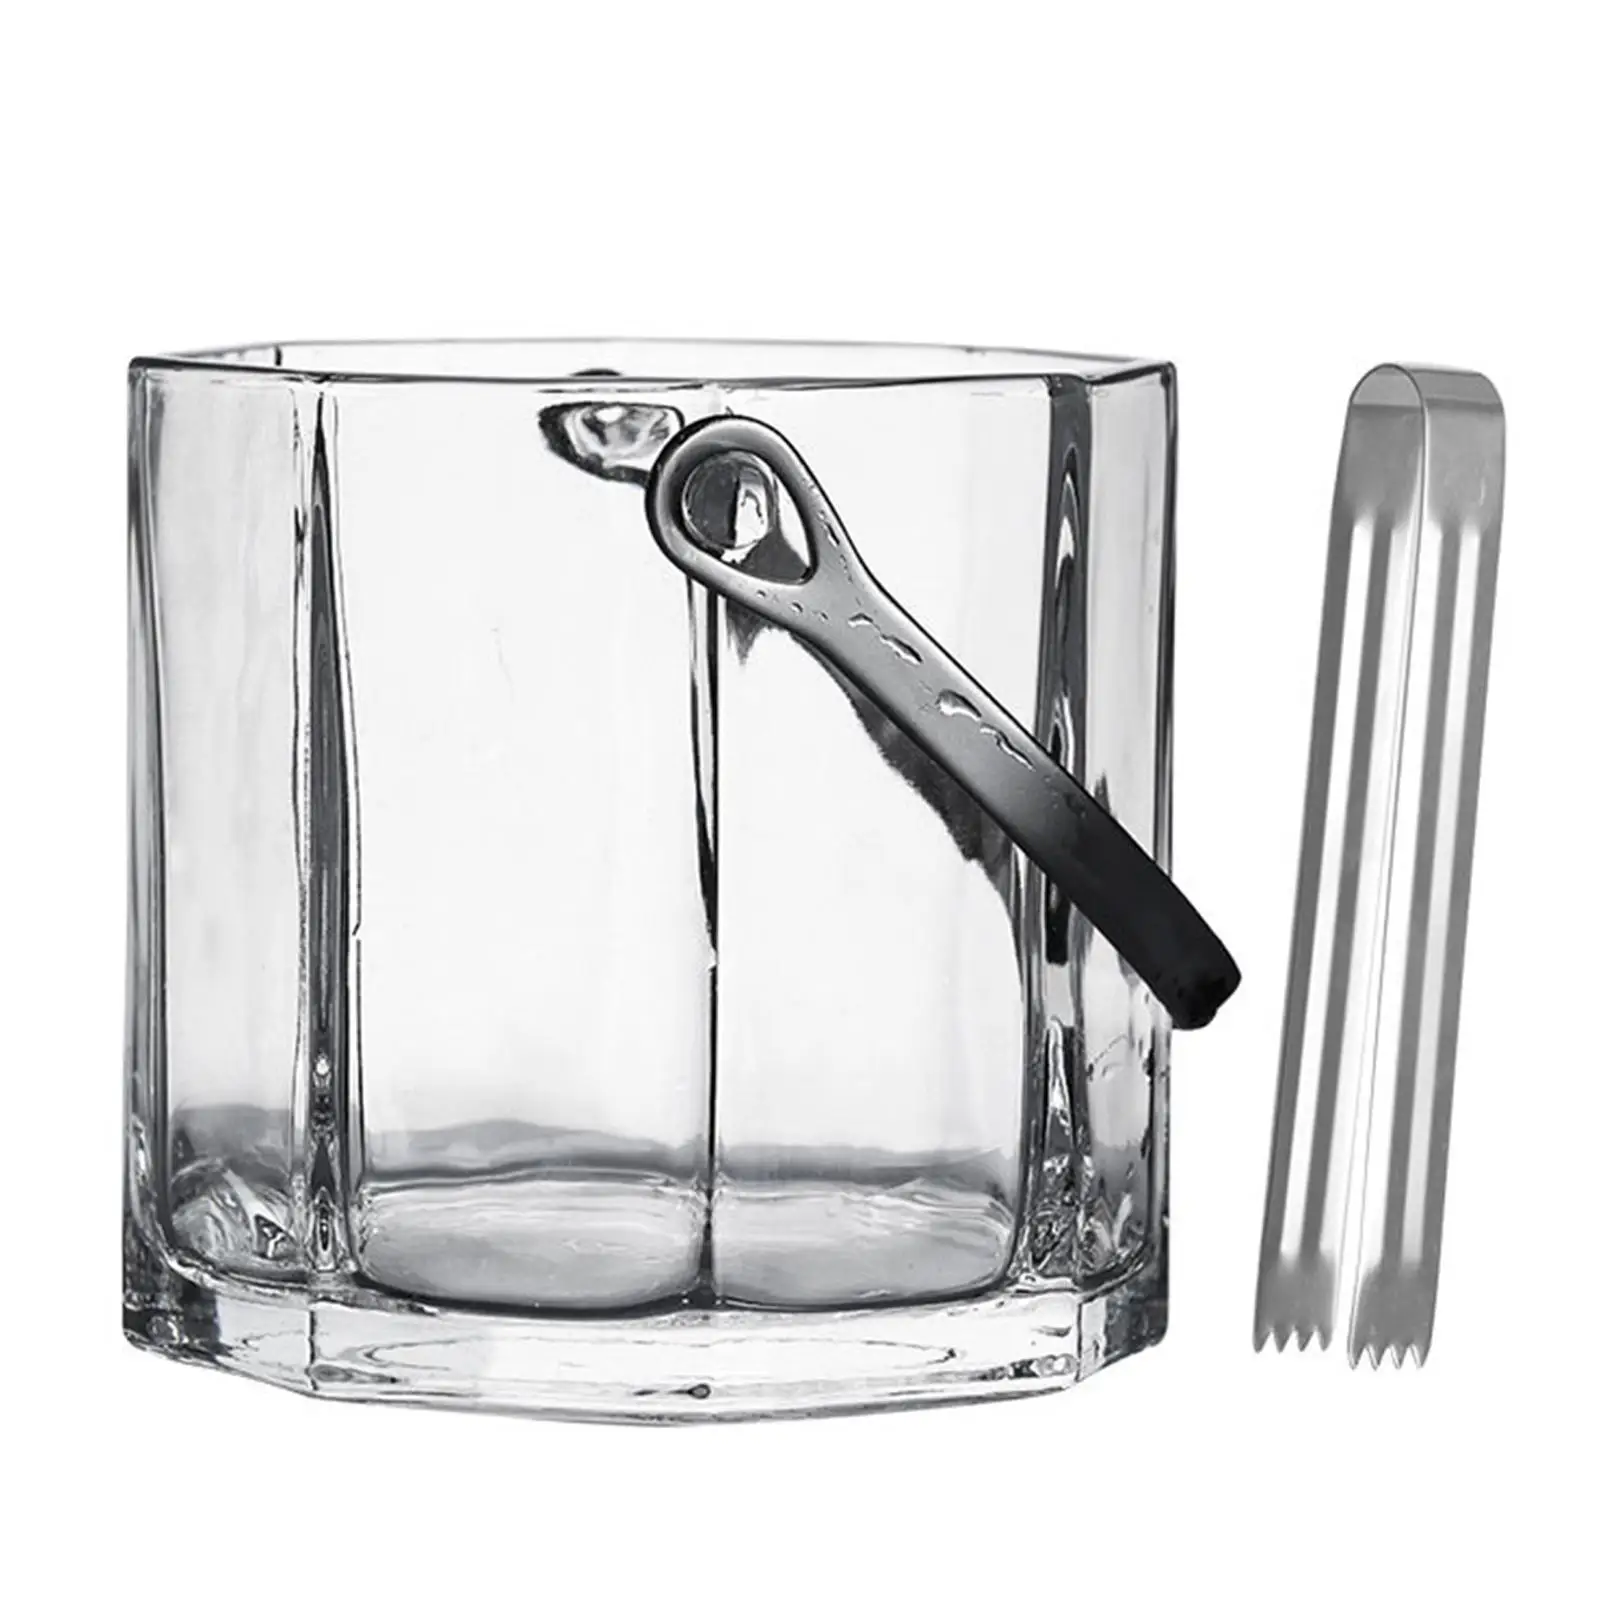 Portable Ice Cube Container Fashionable Appearance with Carry Handle with Ice Clip for Wine Bottle Party Decoration Accessory